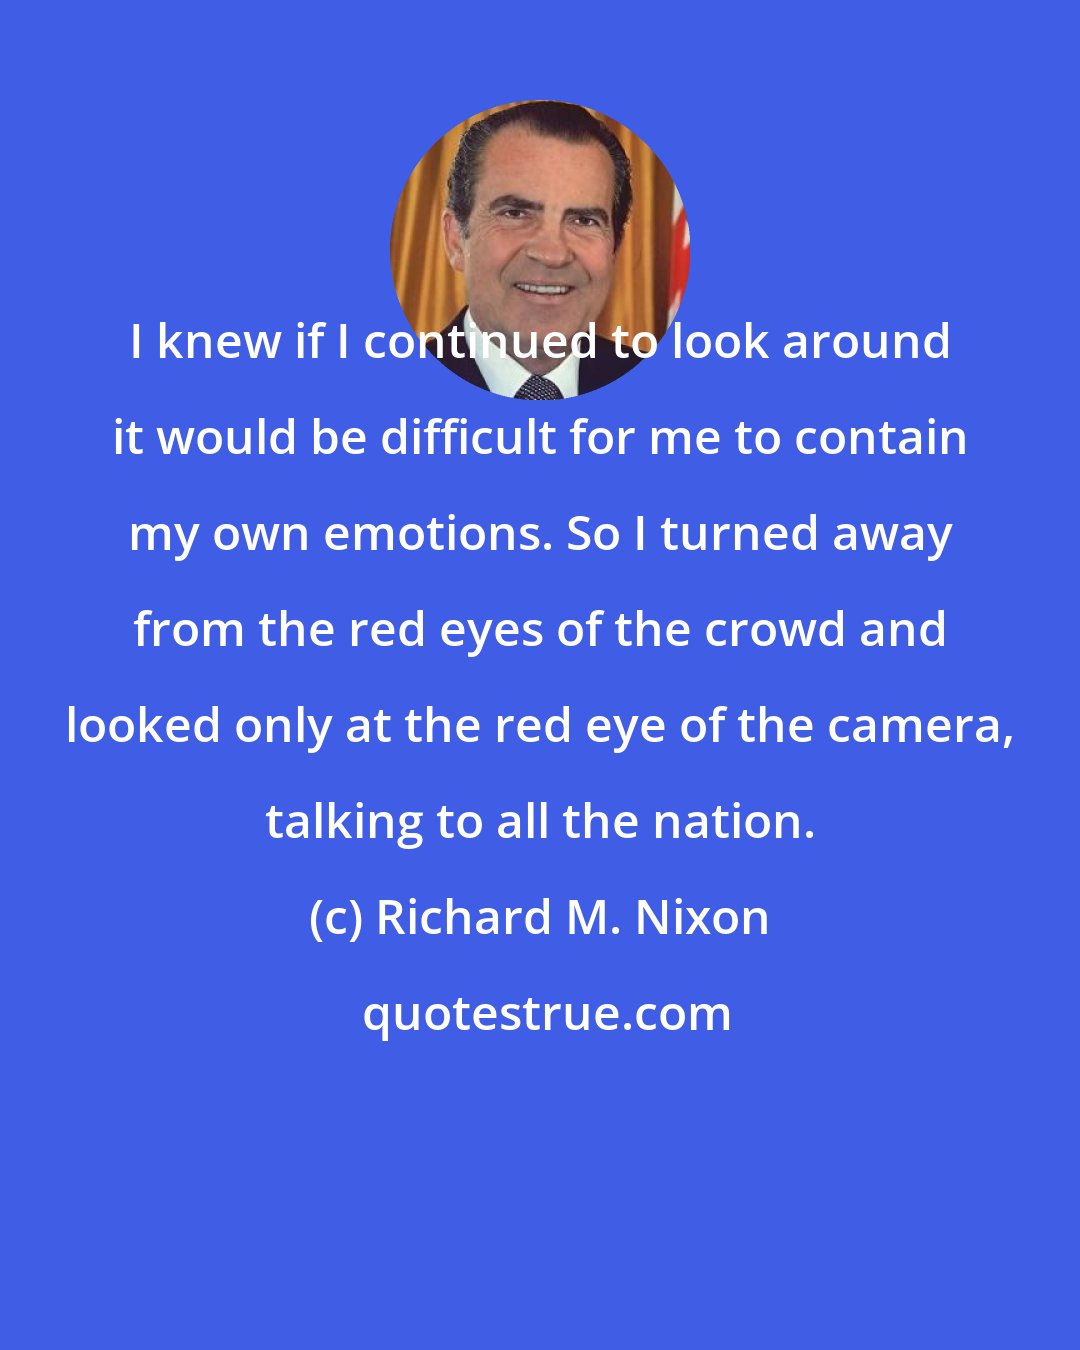 Richard M. Nixon: I knew if I continued to look around it would be difficult for me to contain my own emotions. So I turned away from the red eyes of the crowd and looked only at the red eye of the camera, talking to all the nation.